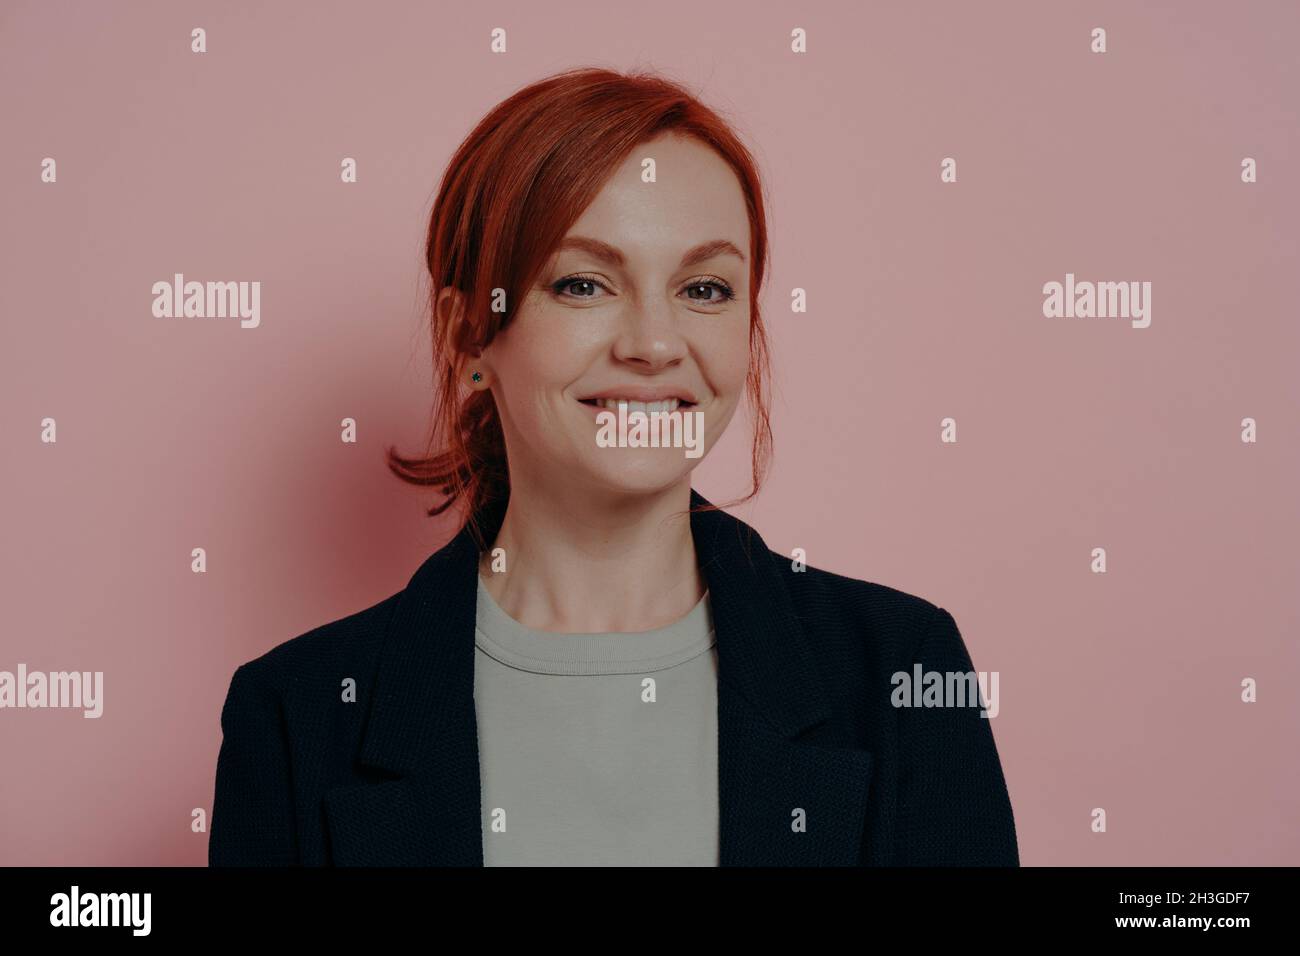 Charming young red-haired female smiling pleasantly at camera, isolated on rosy background Stock Photo